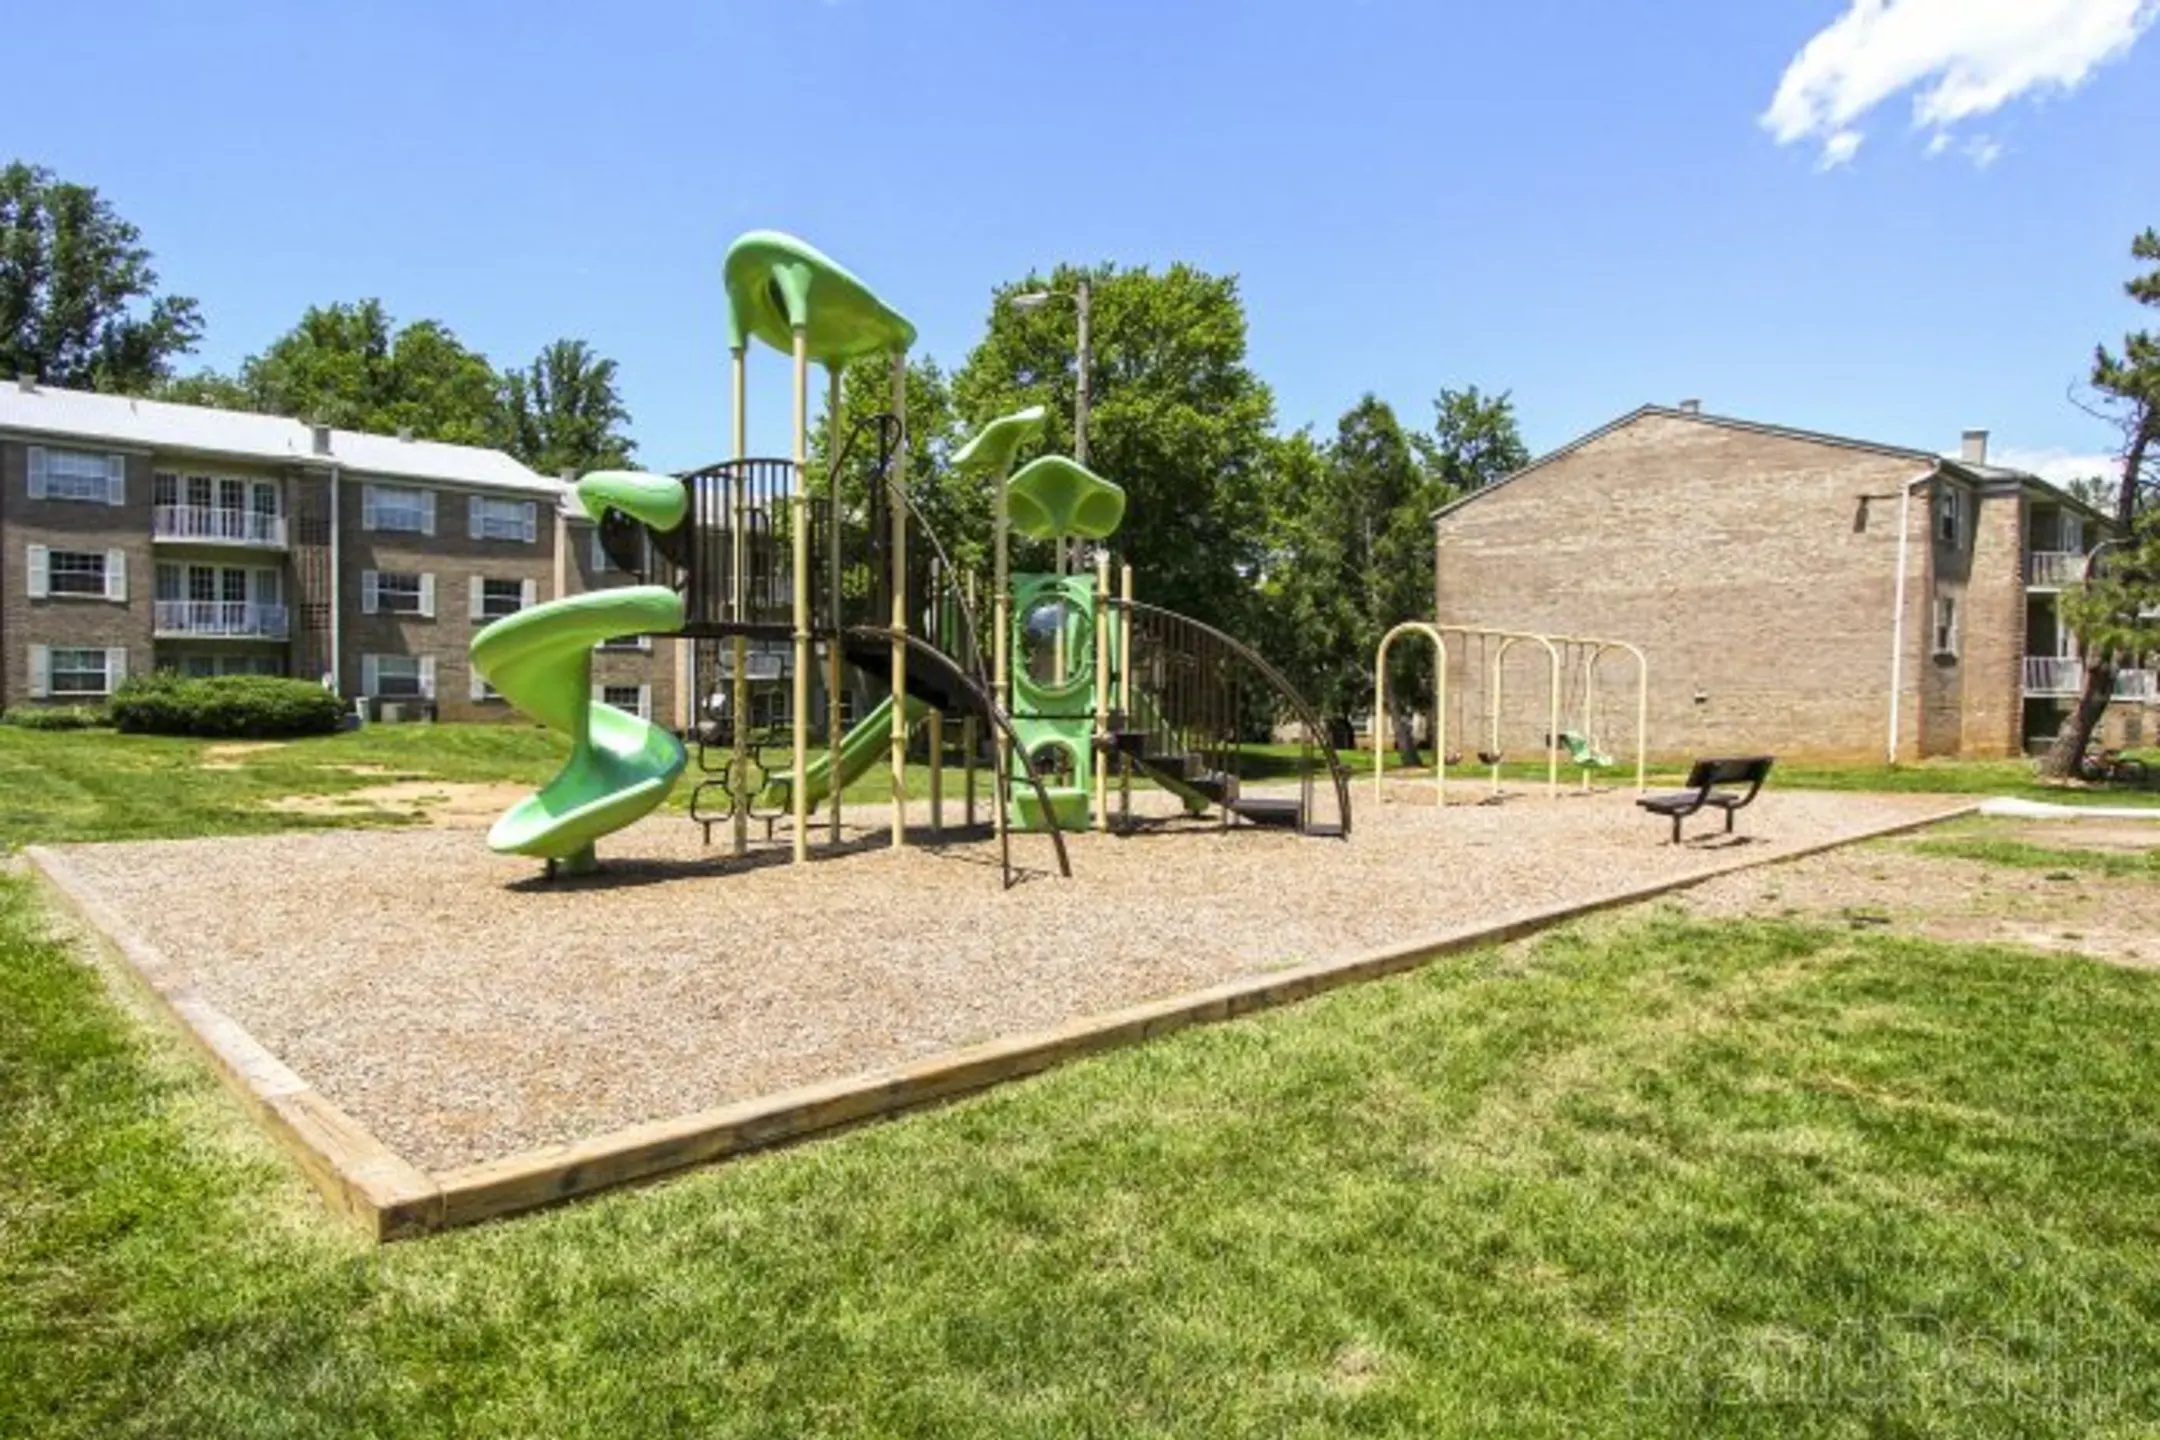 Playground - Dolley Madison Apartments at Tysons - McLean, VA